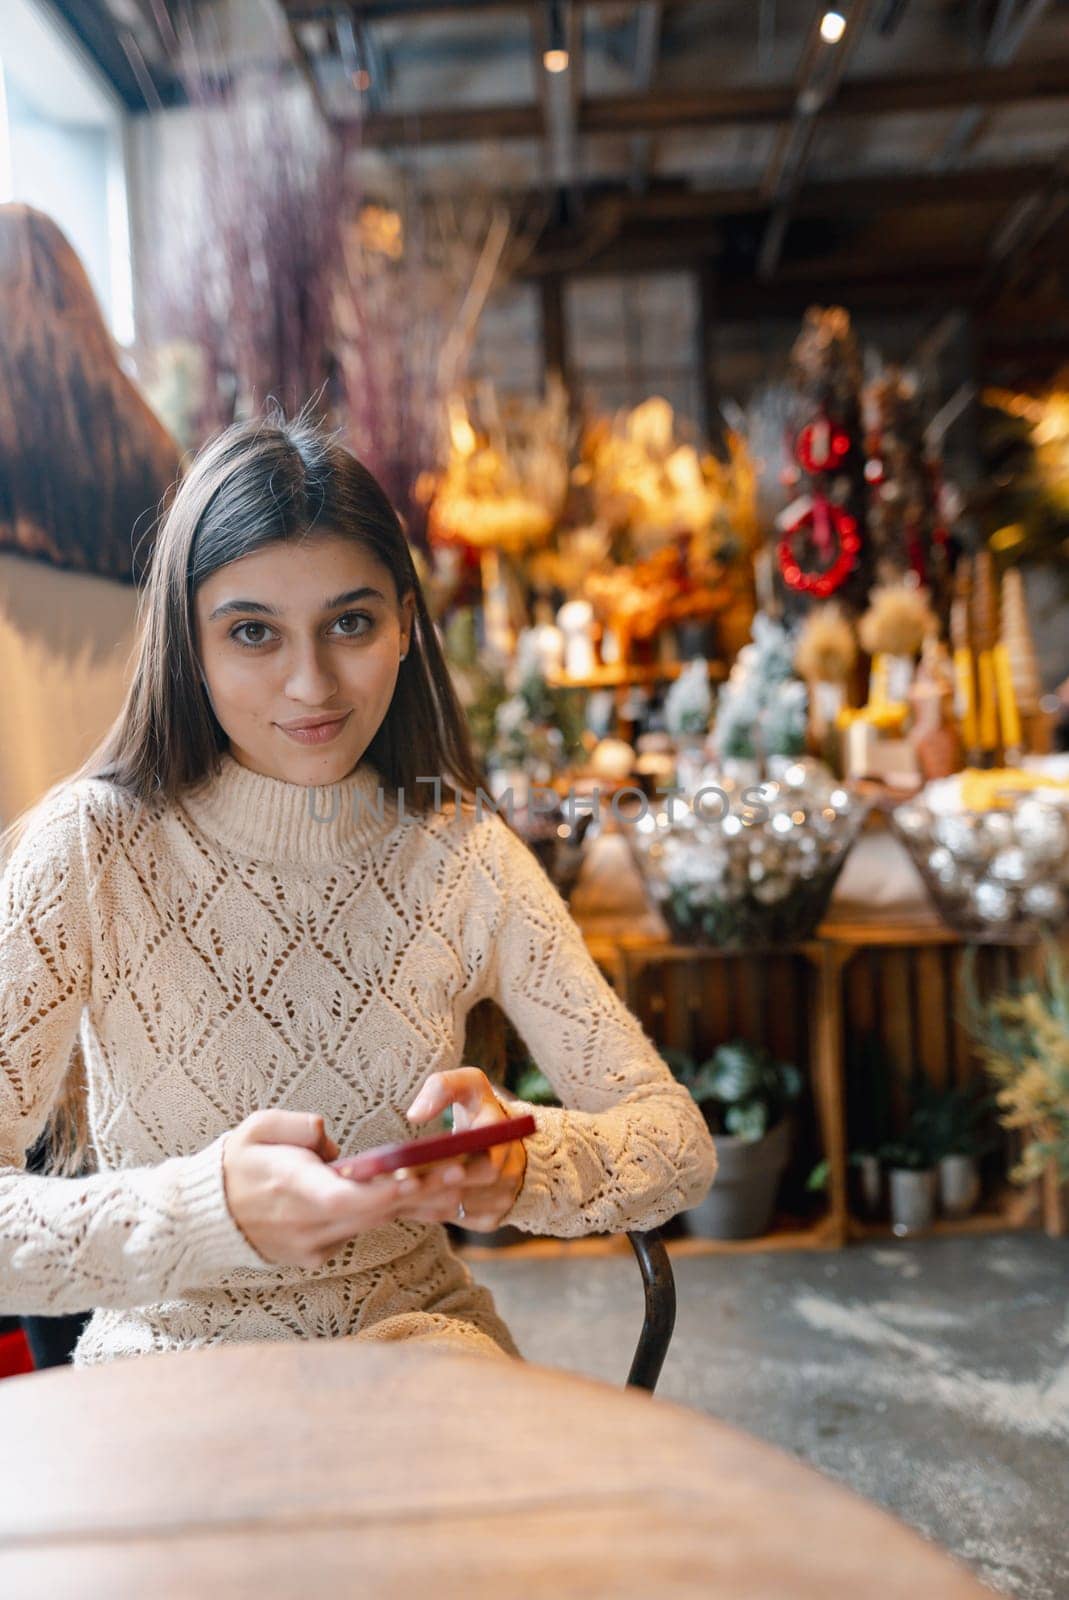 A stunning, colorful young woman browsing Christmas decorations with her smartphone. High quality photo